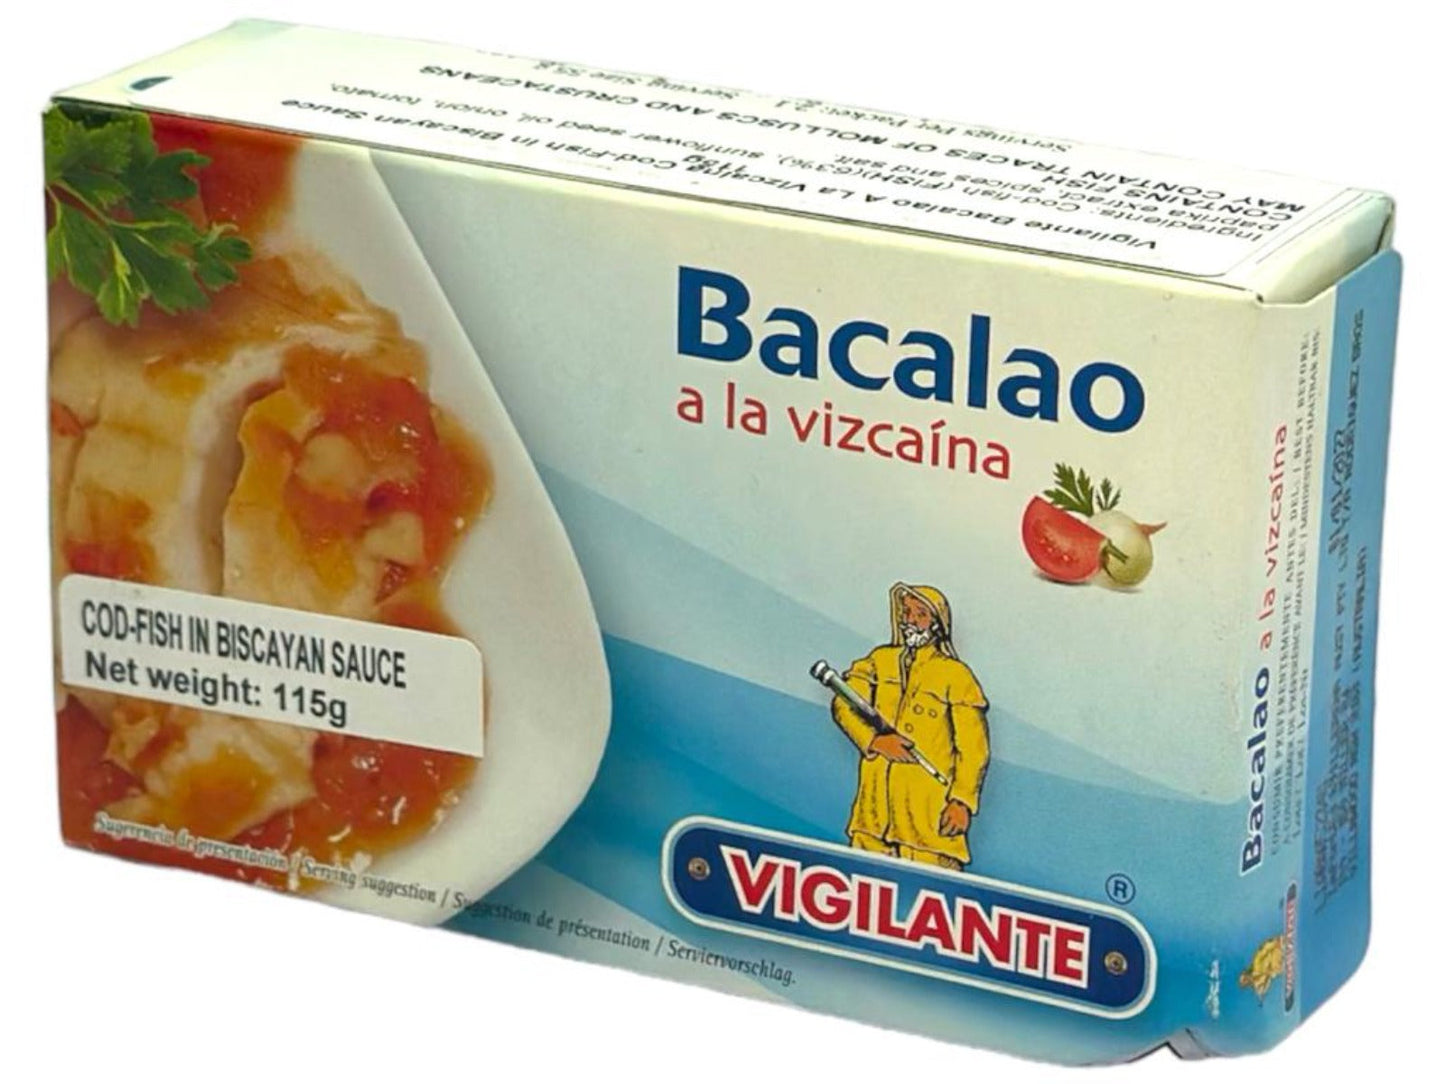 Vigilante Bacalao a la Vizcaina -Spanish Cod-Fish in Biscayan Sauce 115g - 4 Pack 460g Total BEST BEFORE JAN 2027